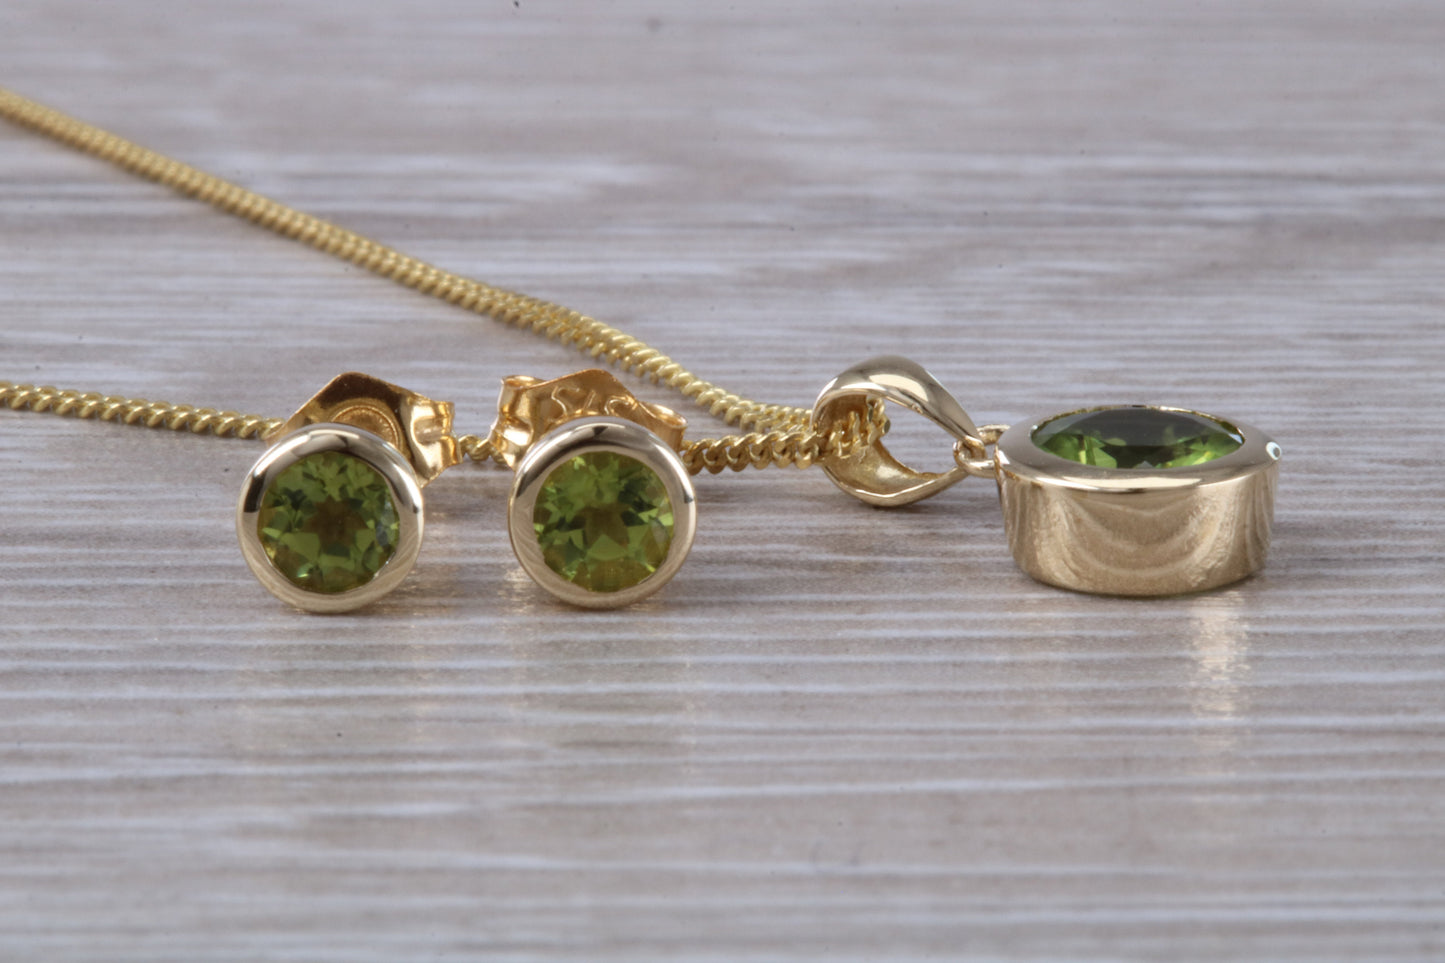 Real Peridot Earrings and Necklace Set, Solid 9ct Yellow Gold